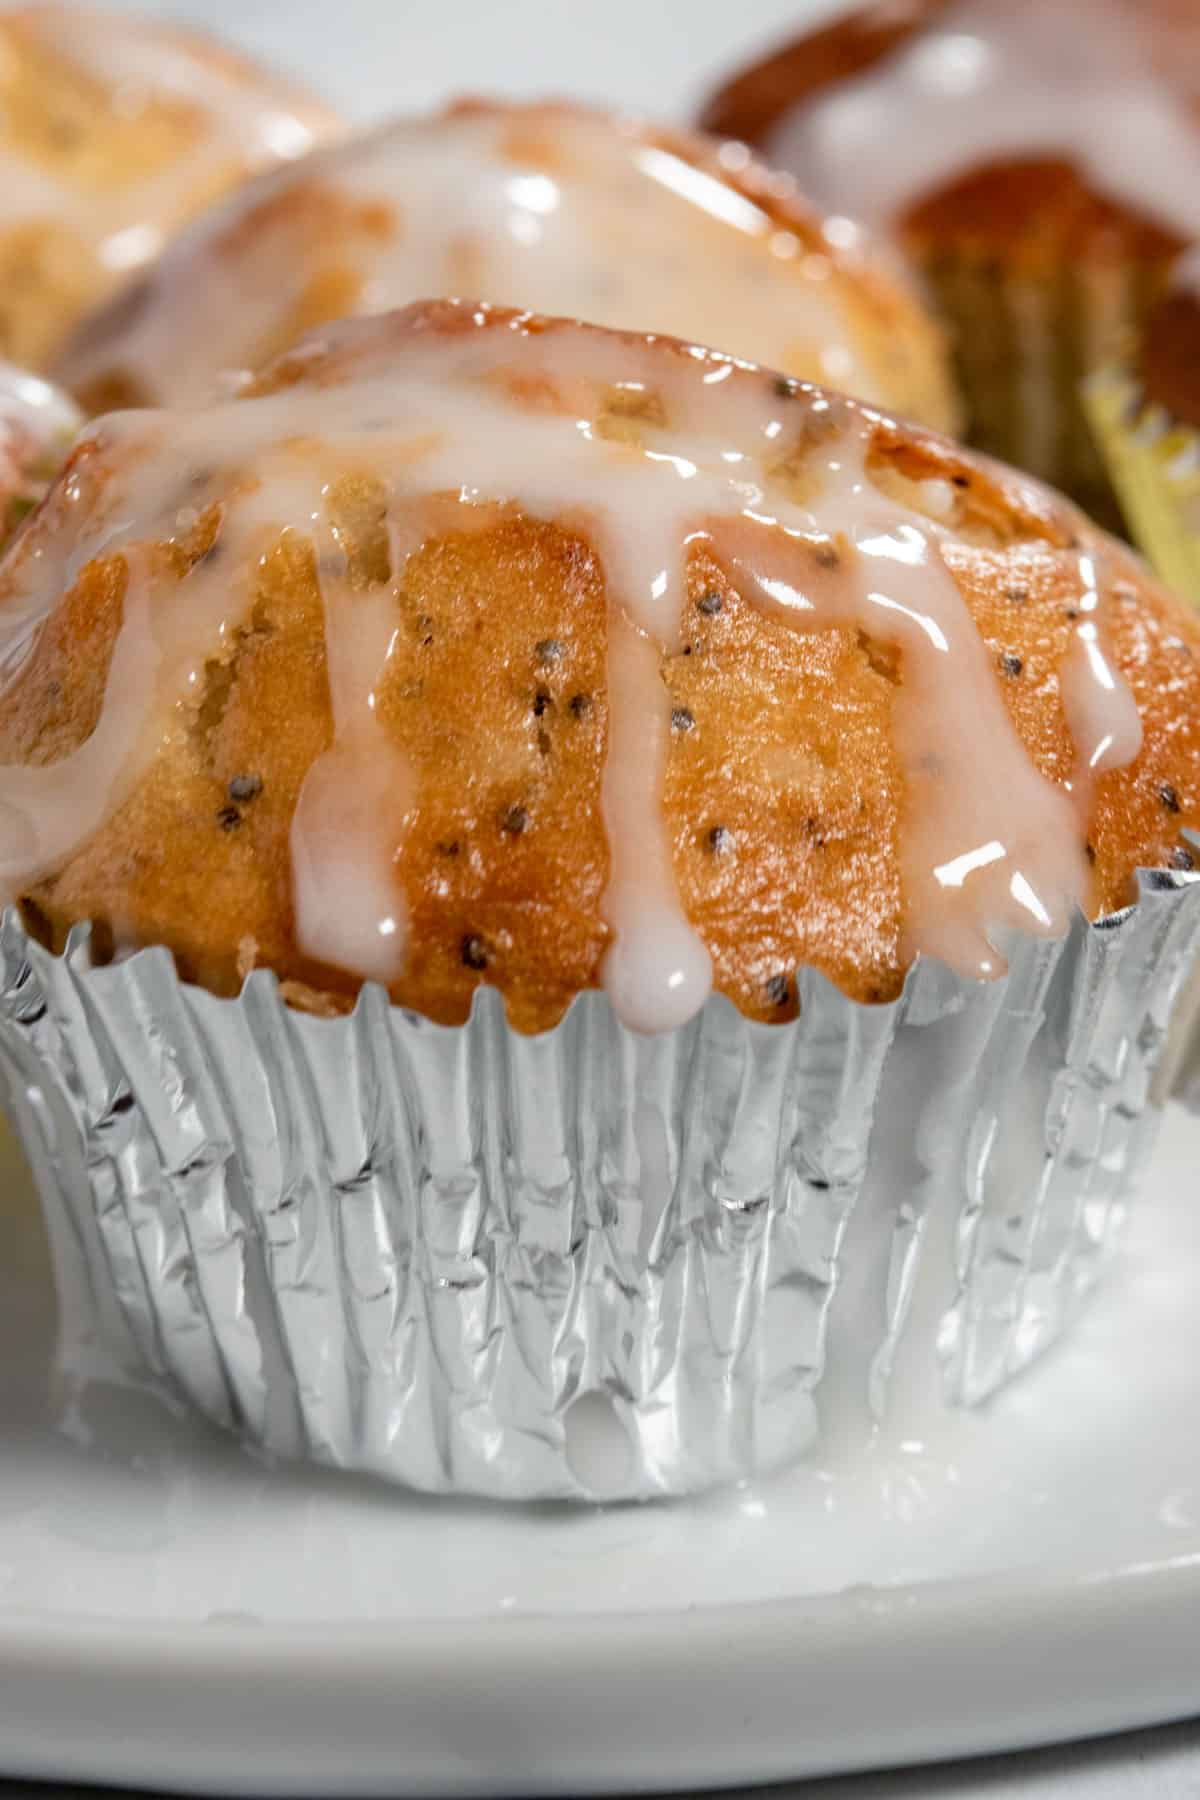 A close up shot showing a muffin sitting inside a shiny, silver cupcake liner. There are other muffins in the background. 